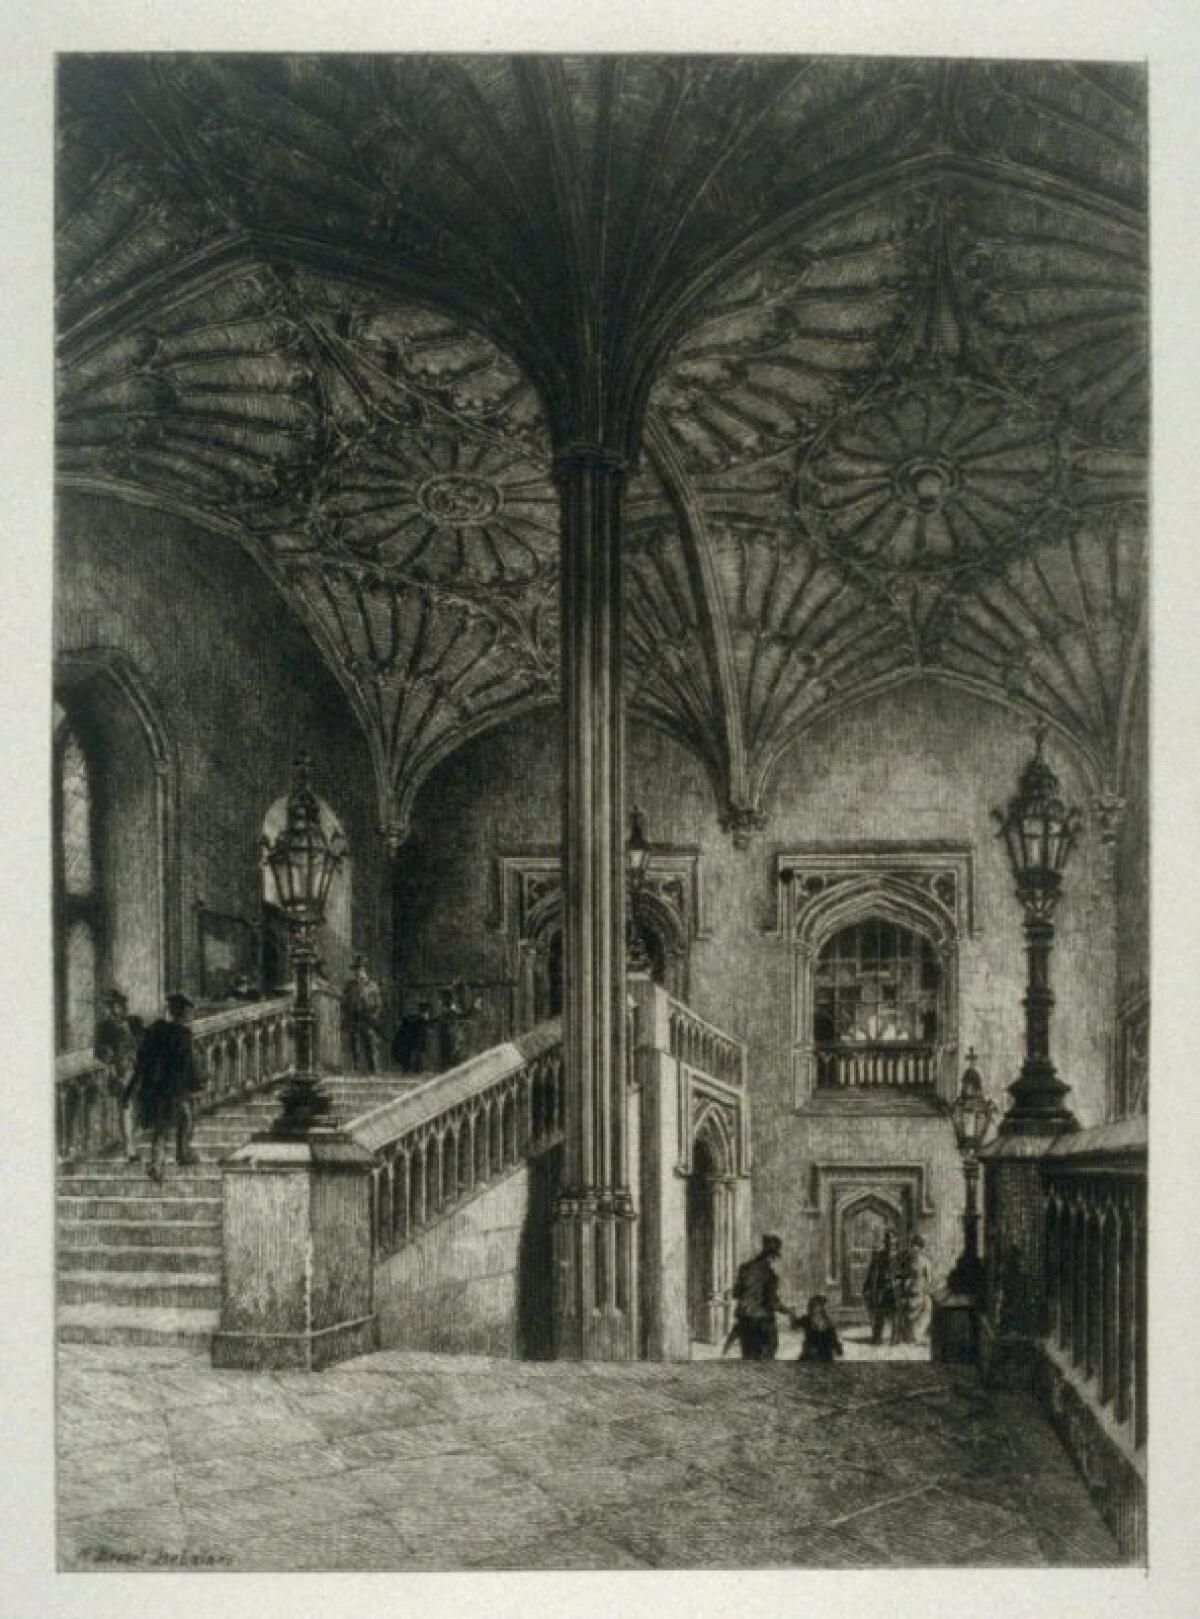 Engraving of a colonnaded entry